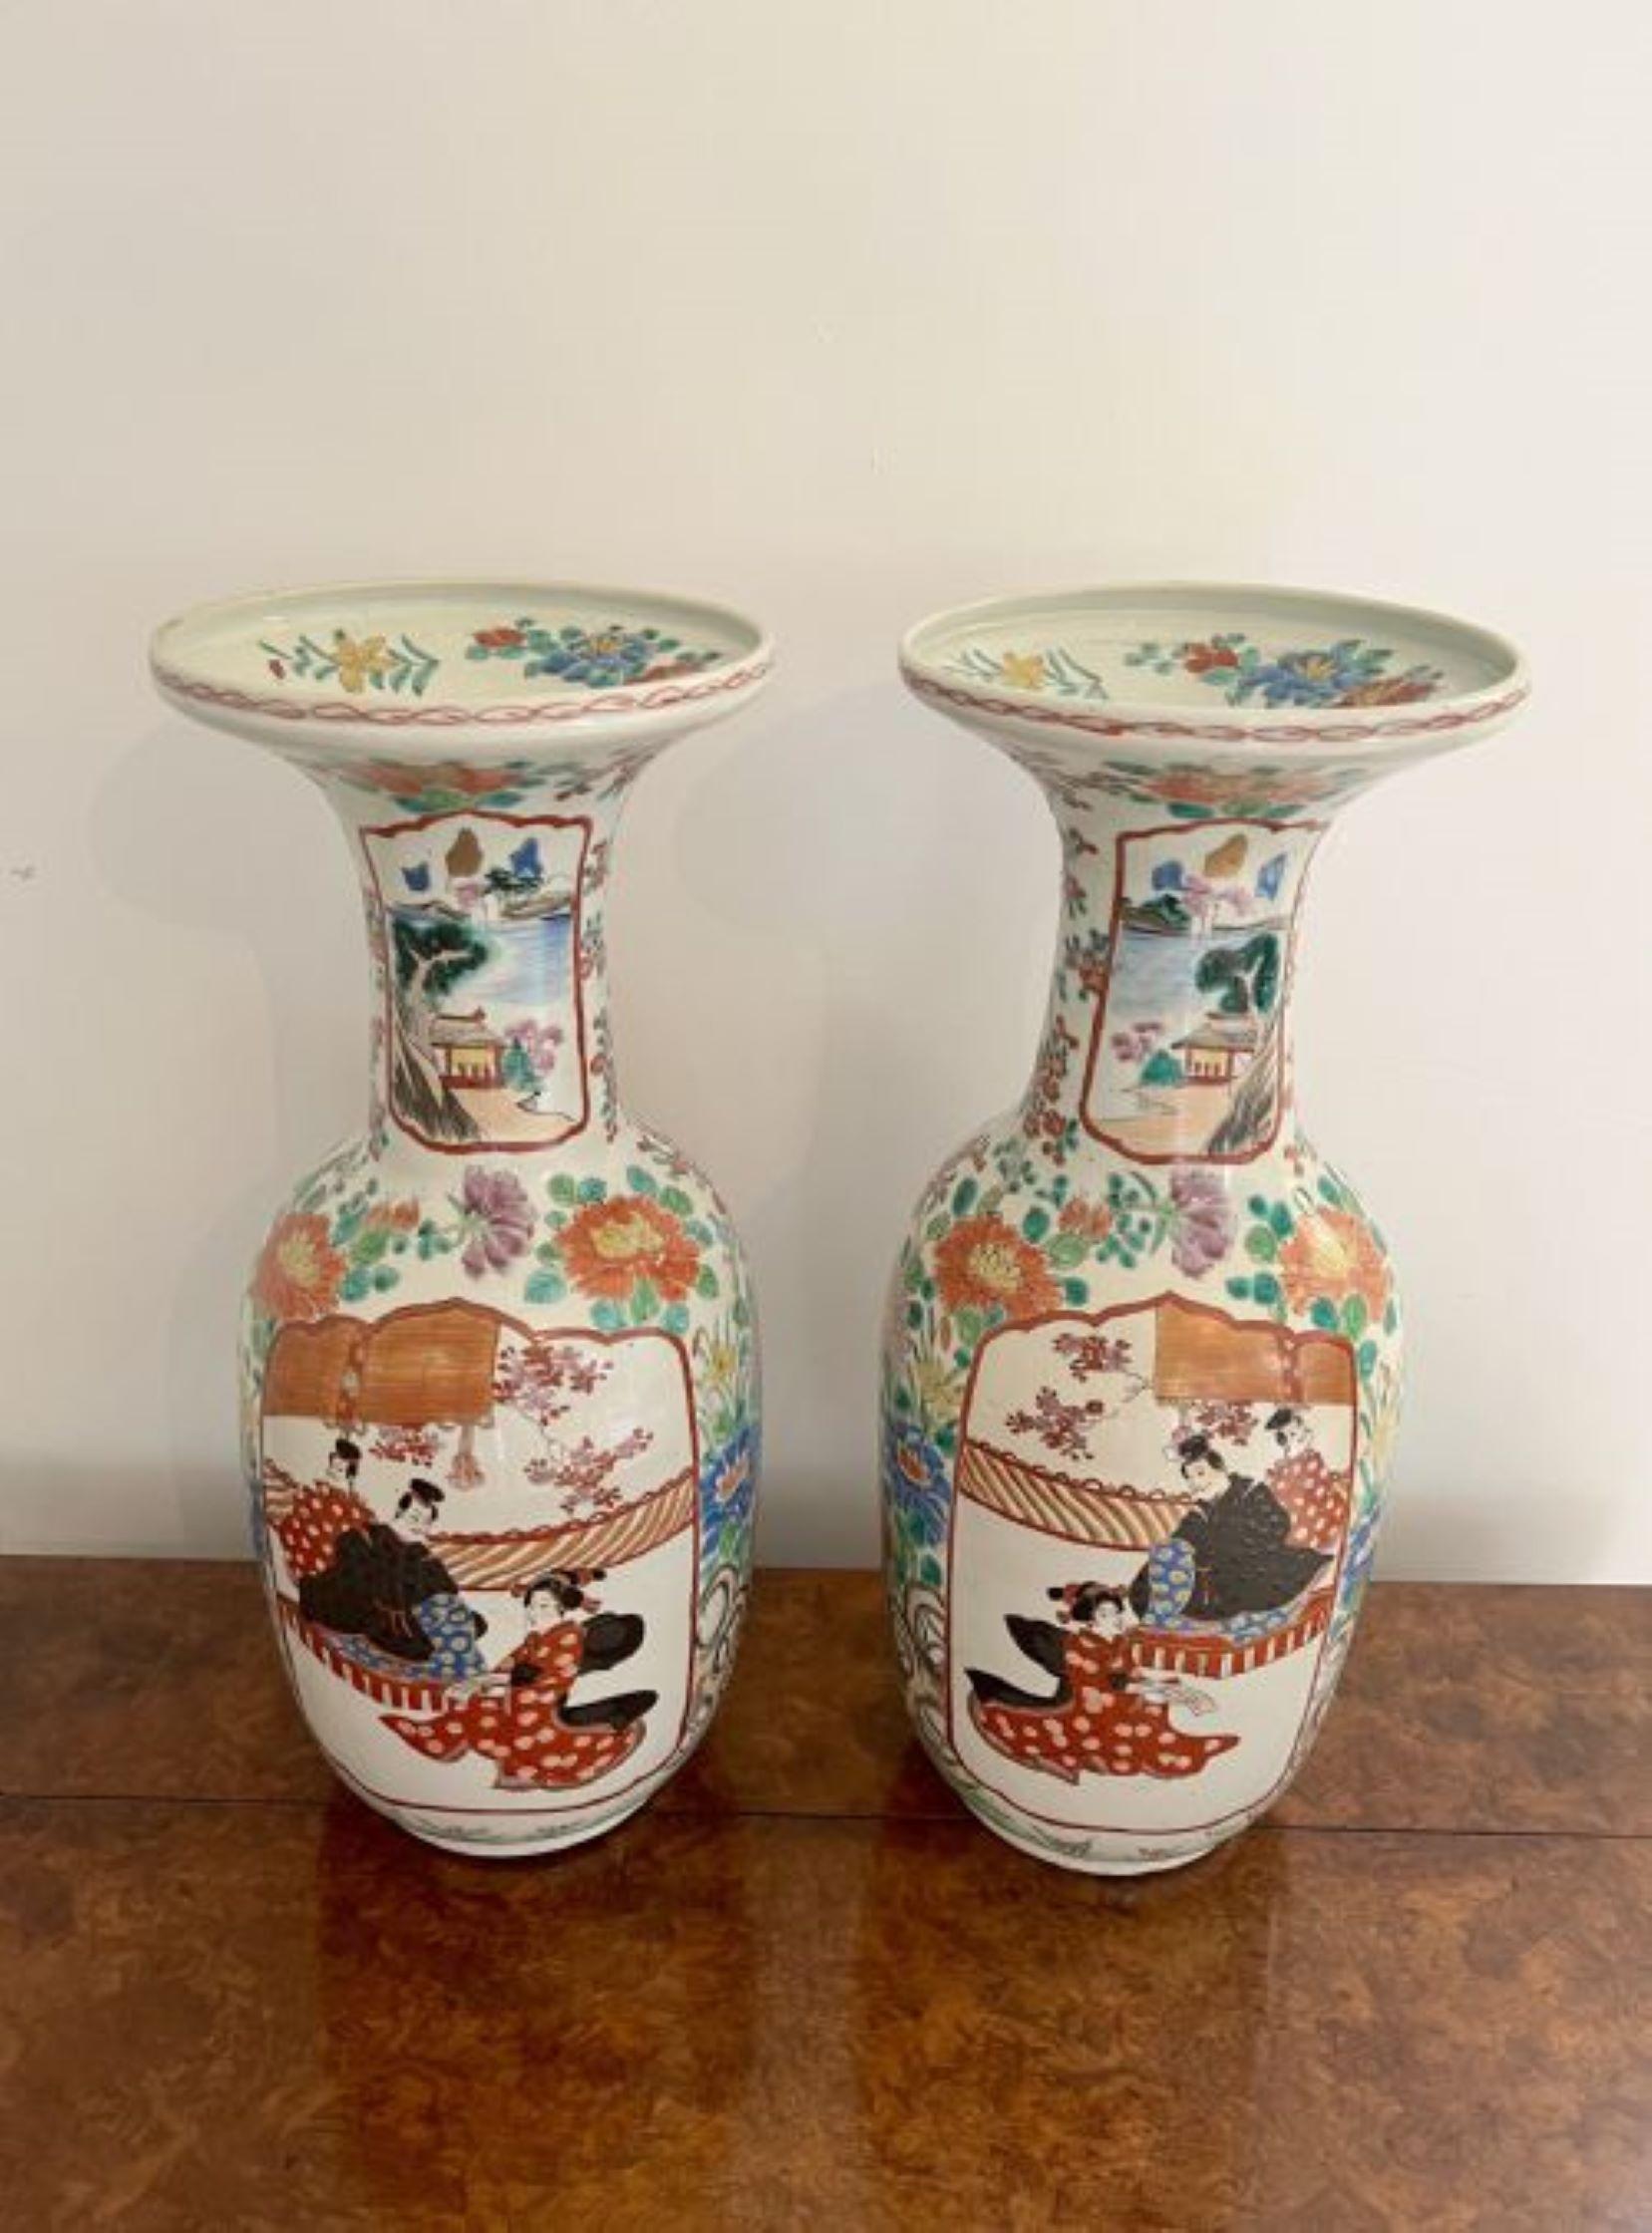 Fantastic quality pair of large antique Japanese imari vases having a fantastic quality pair of antique Japanese imari vases decorated with traditional Japanese figures, scenery and flowers hand painted in wonderful green, orange, red, black, blue